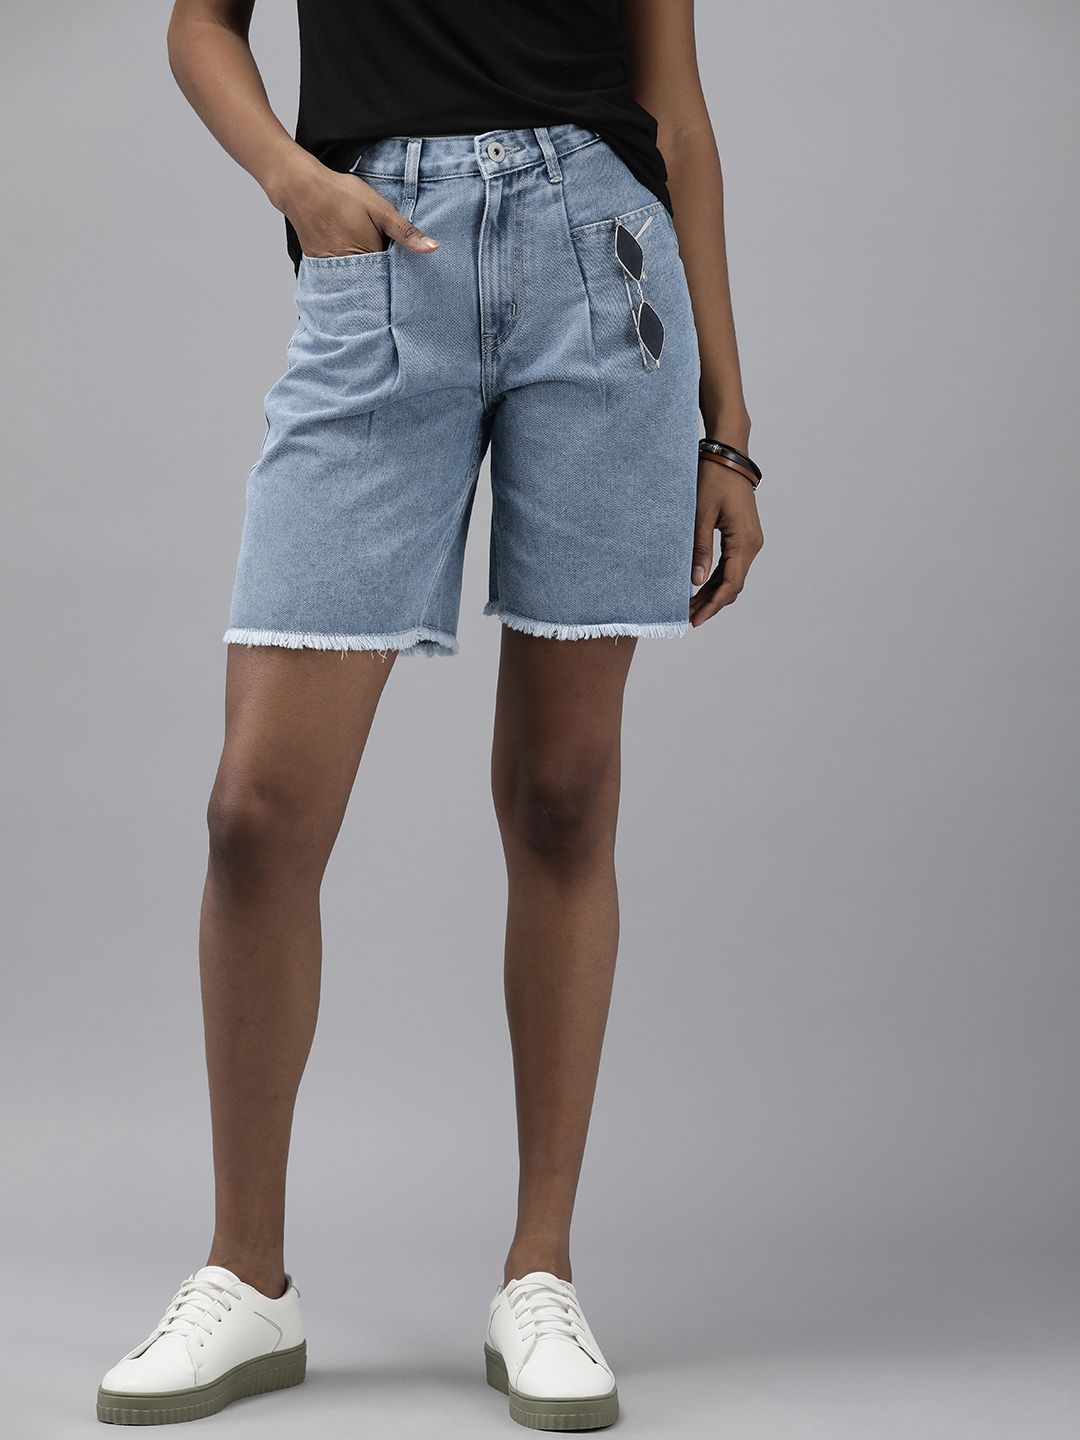 The Roadster Life Co. Women High-Rise Pure Cotton Denim Bermuda Shorts Price in India